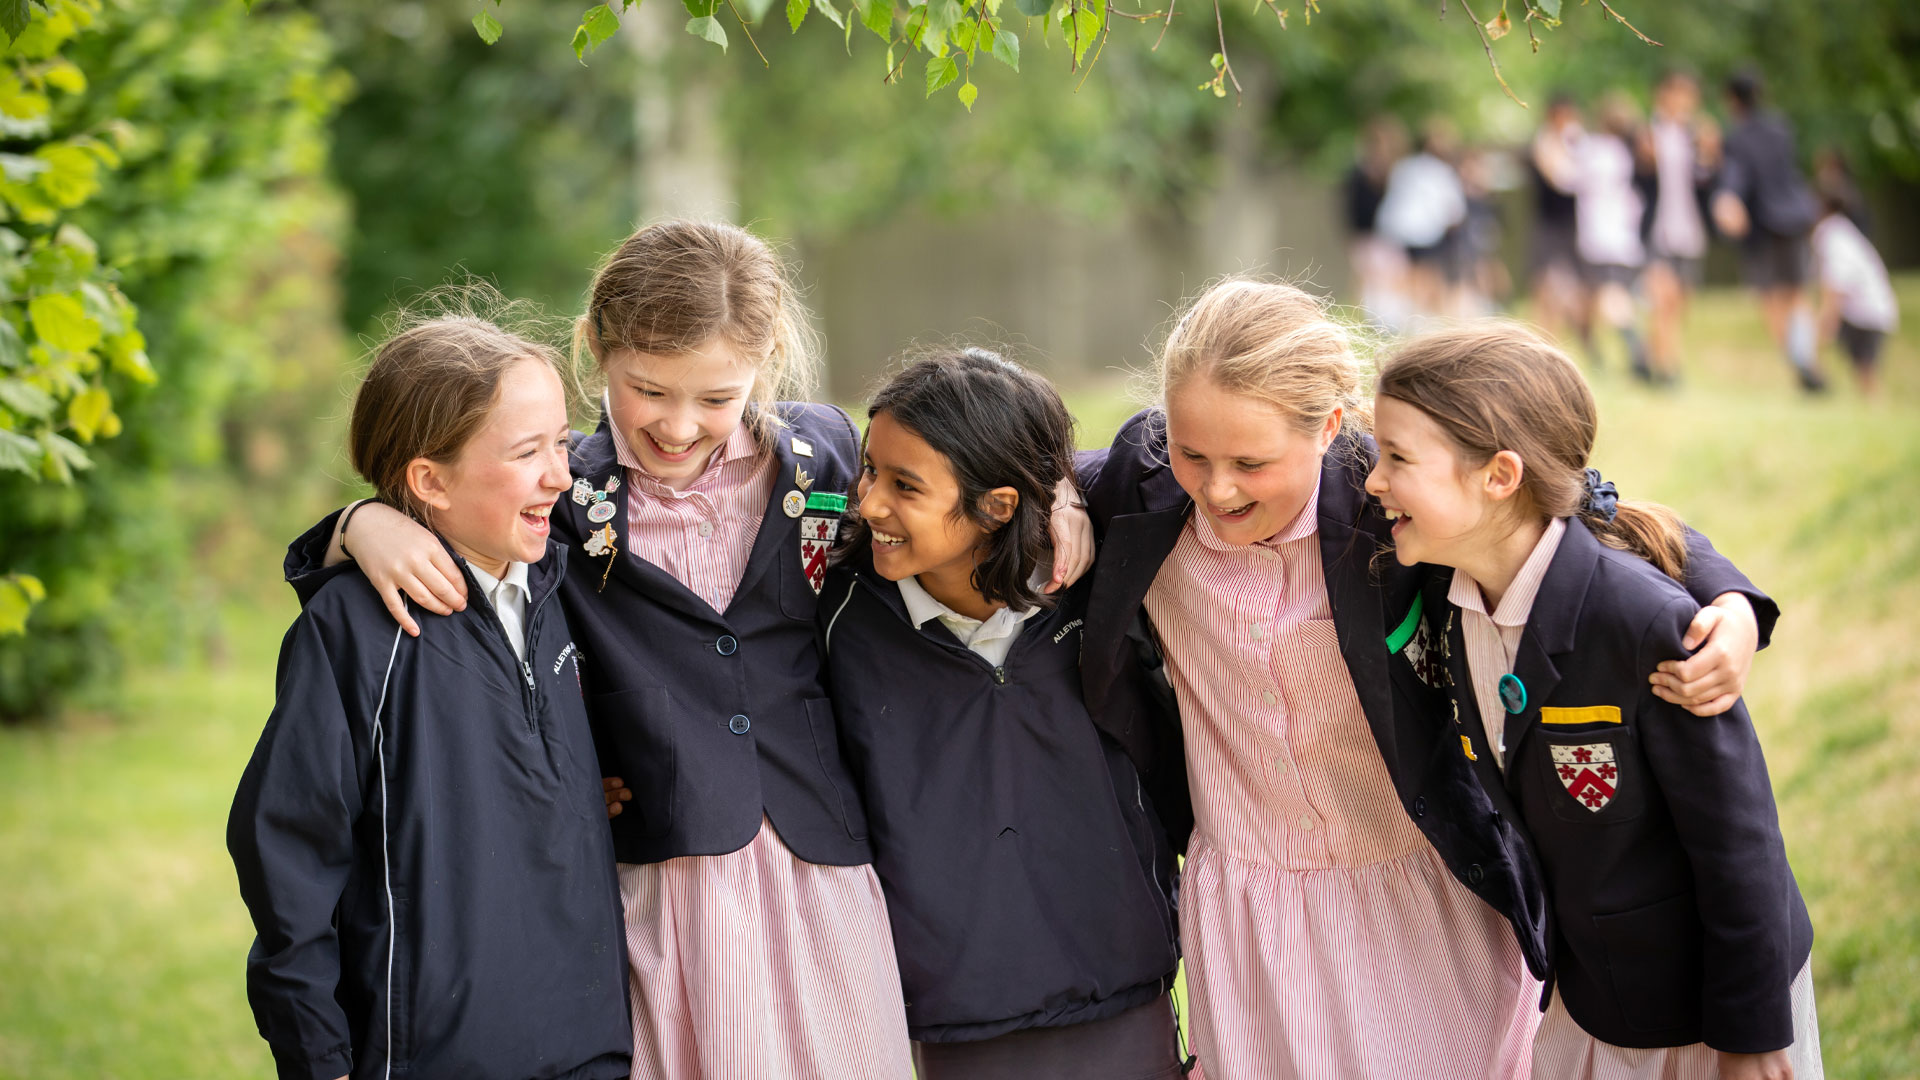 A group of students at Alleyn's junior school